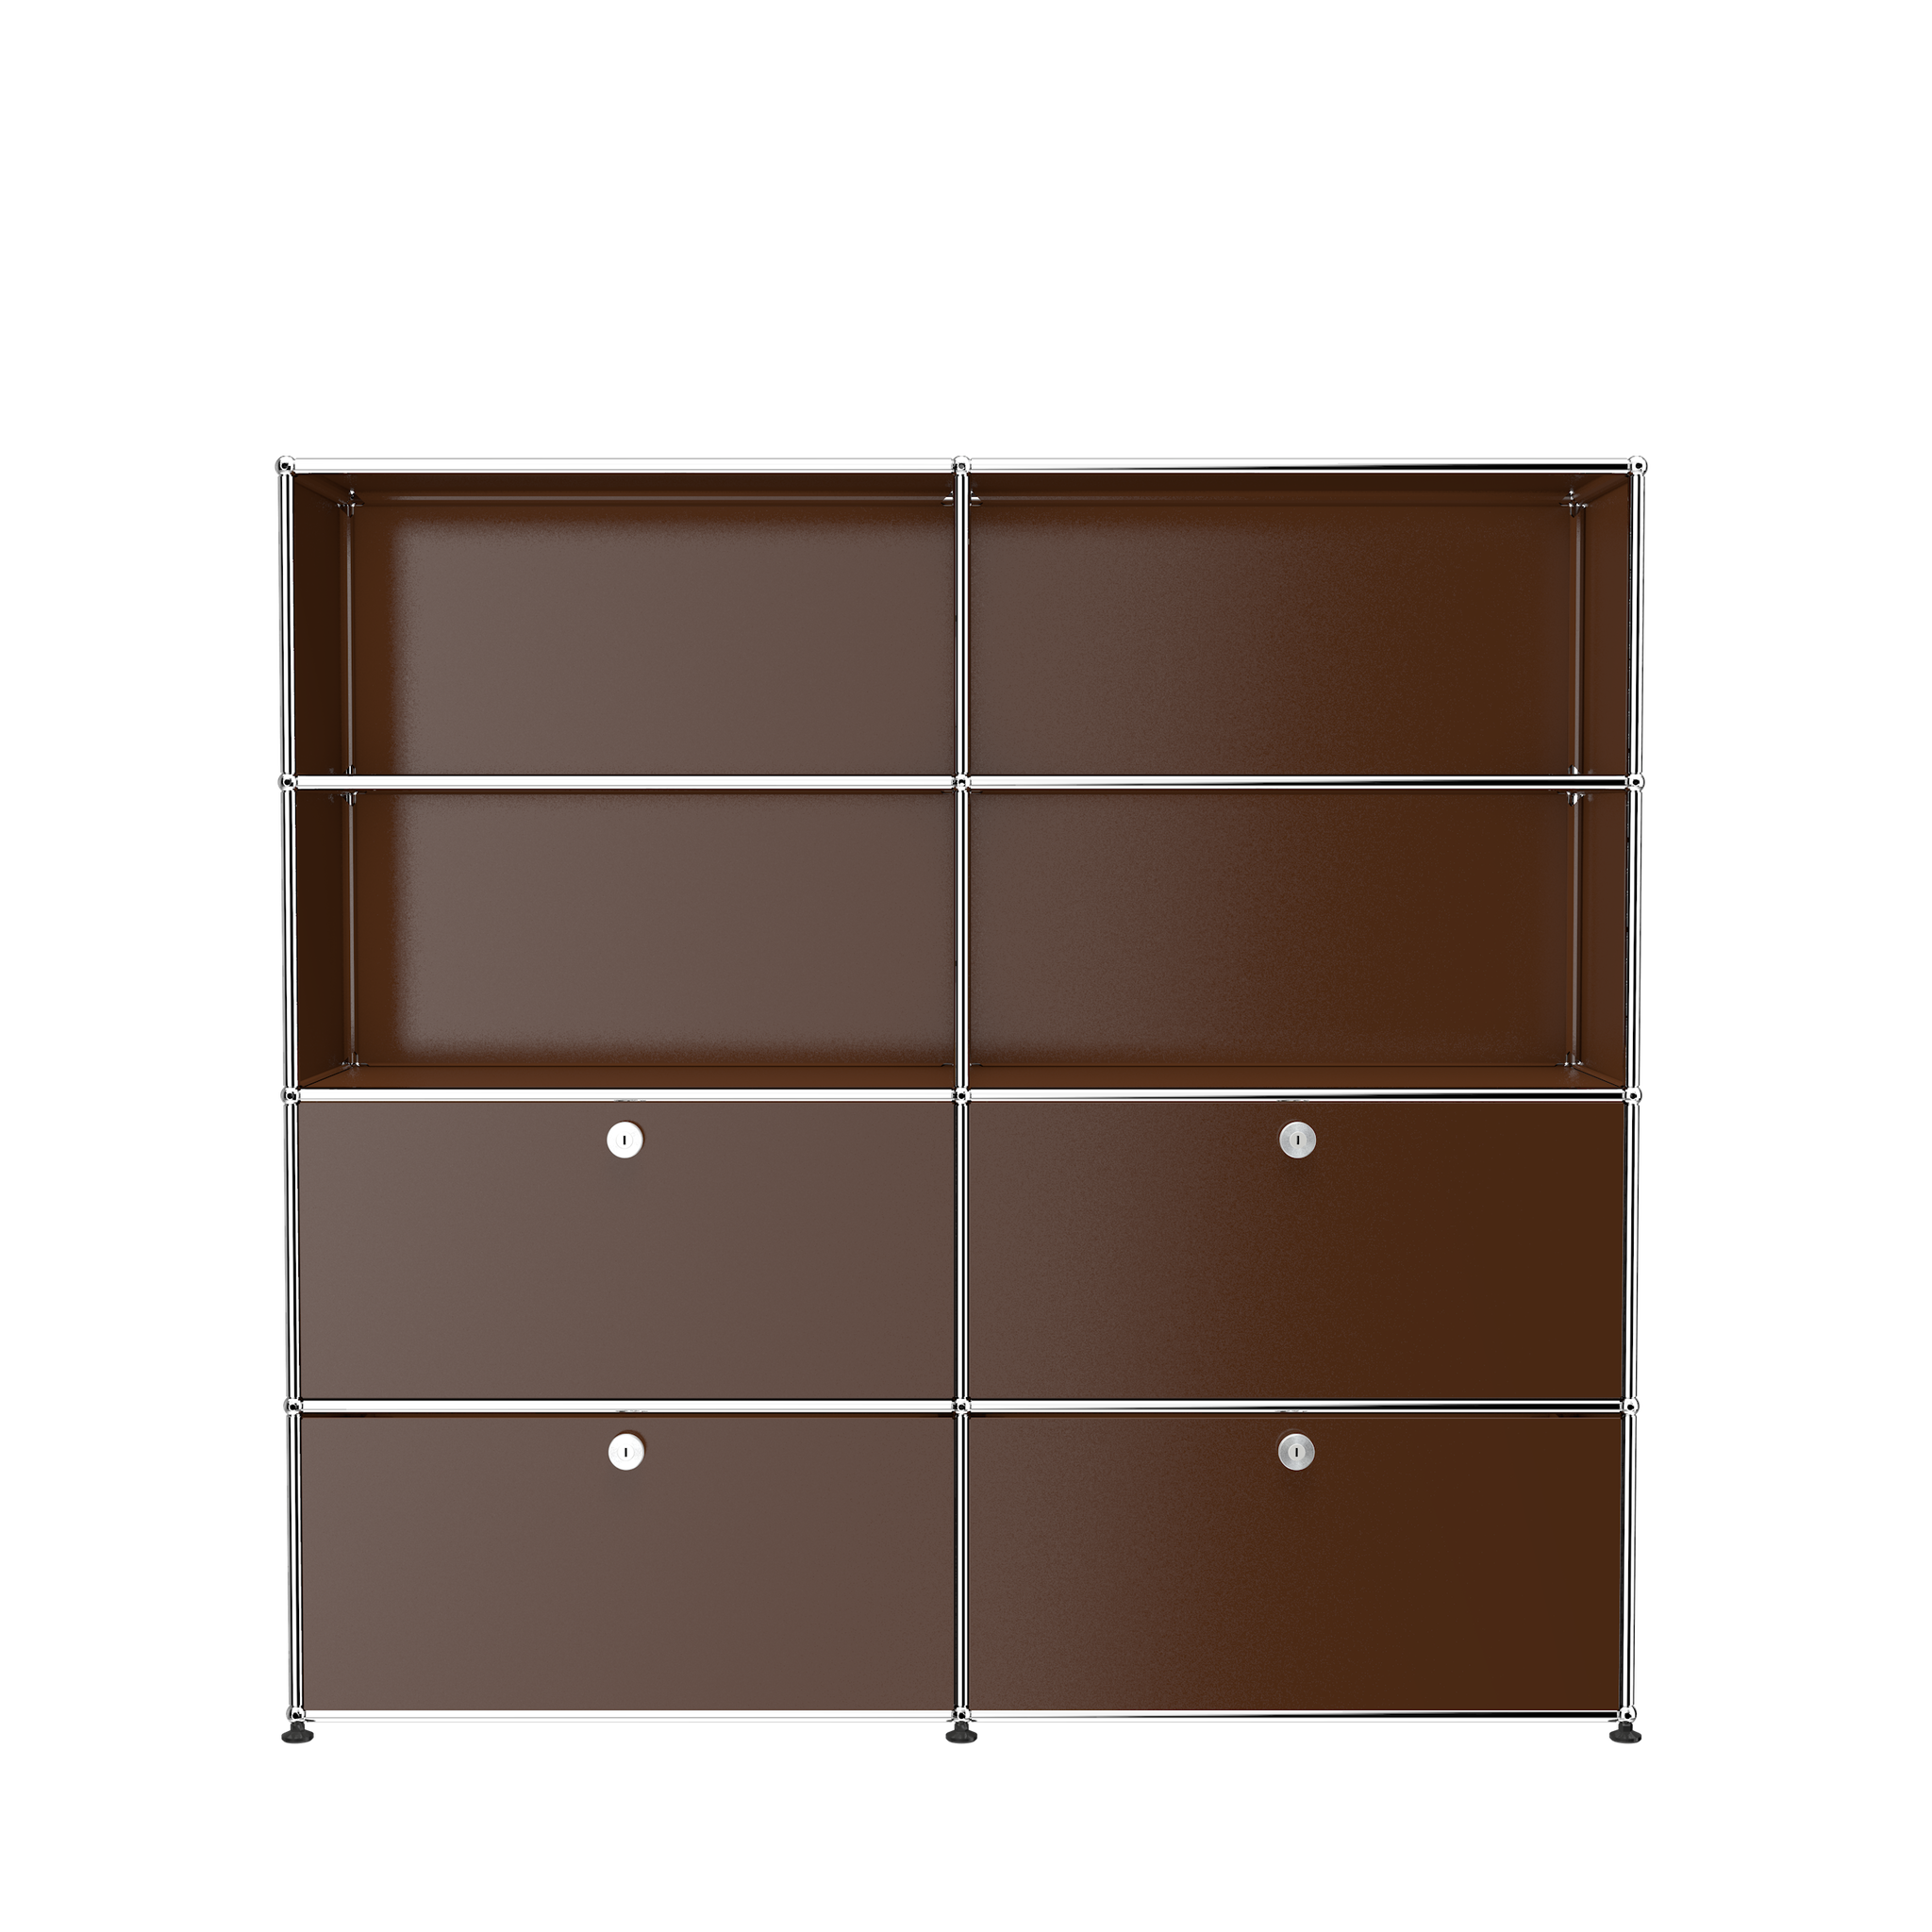 USM Haller Storage & Shelving Unit With Drawers (S2) in Brown